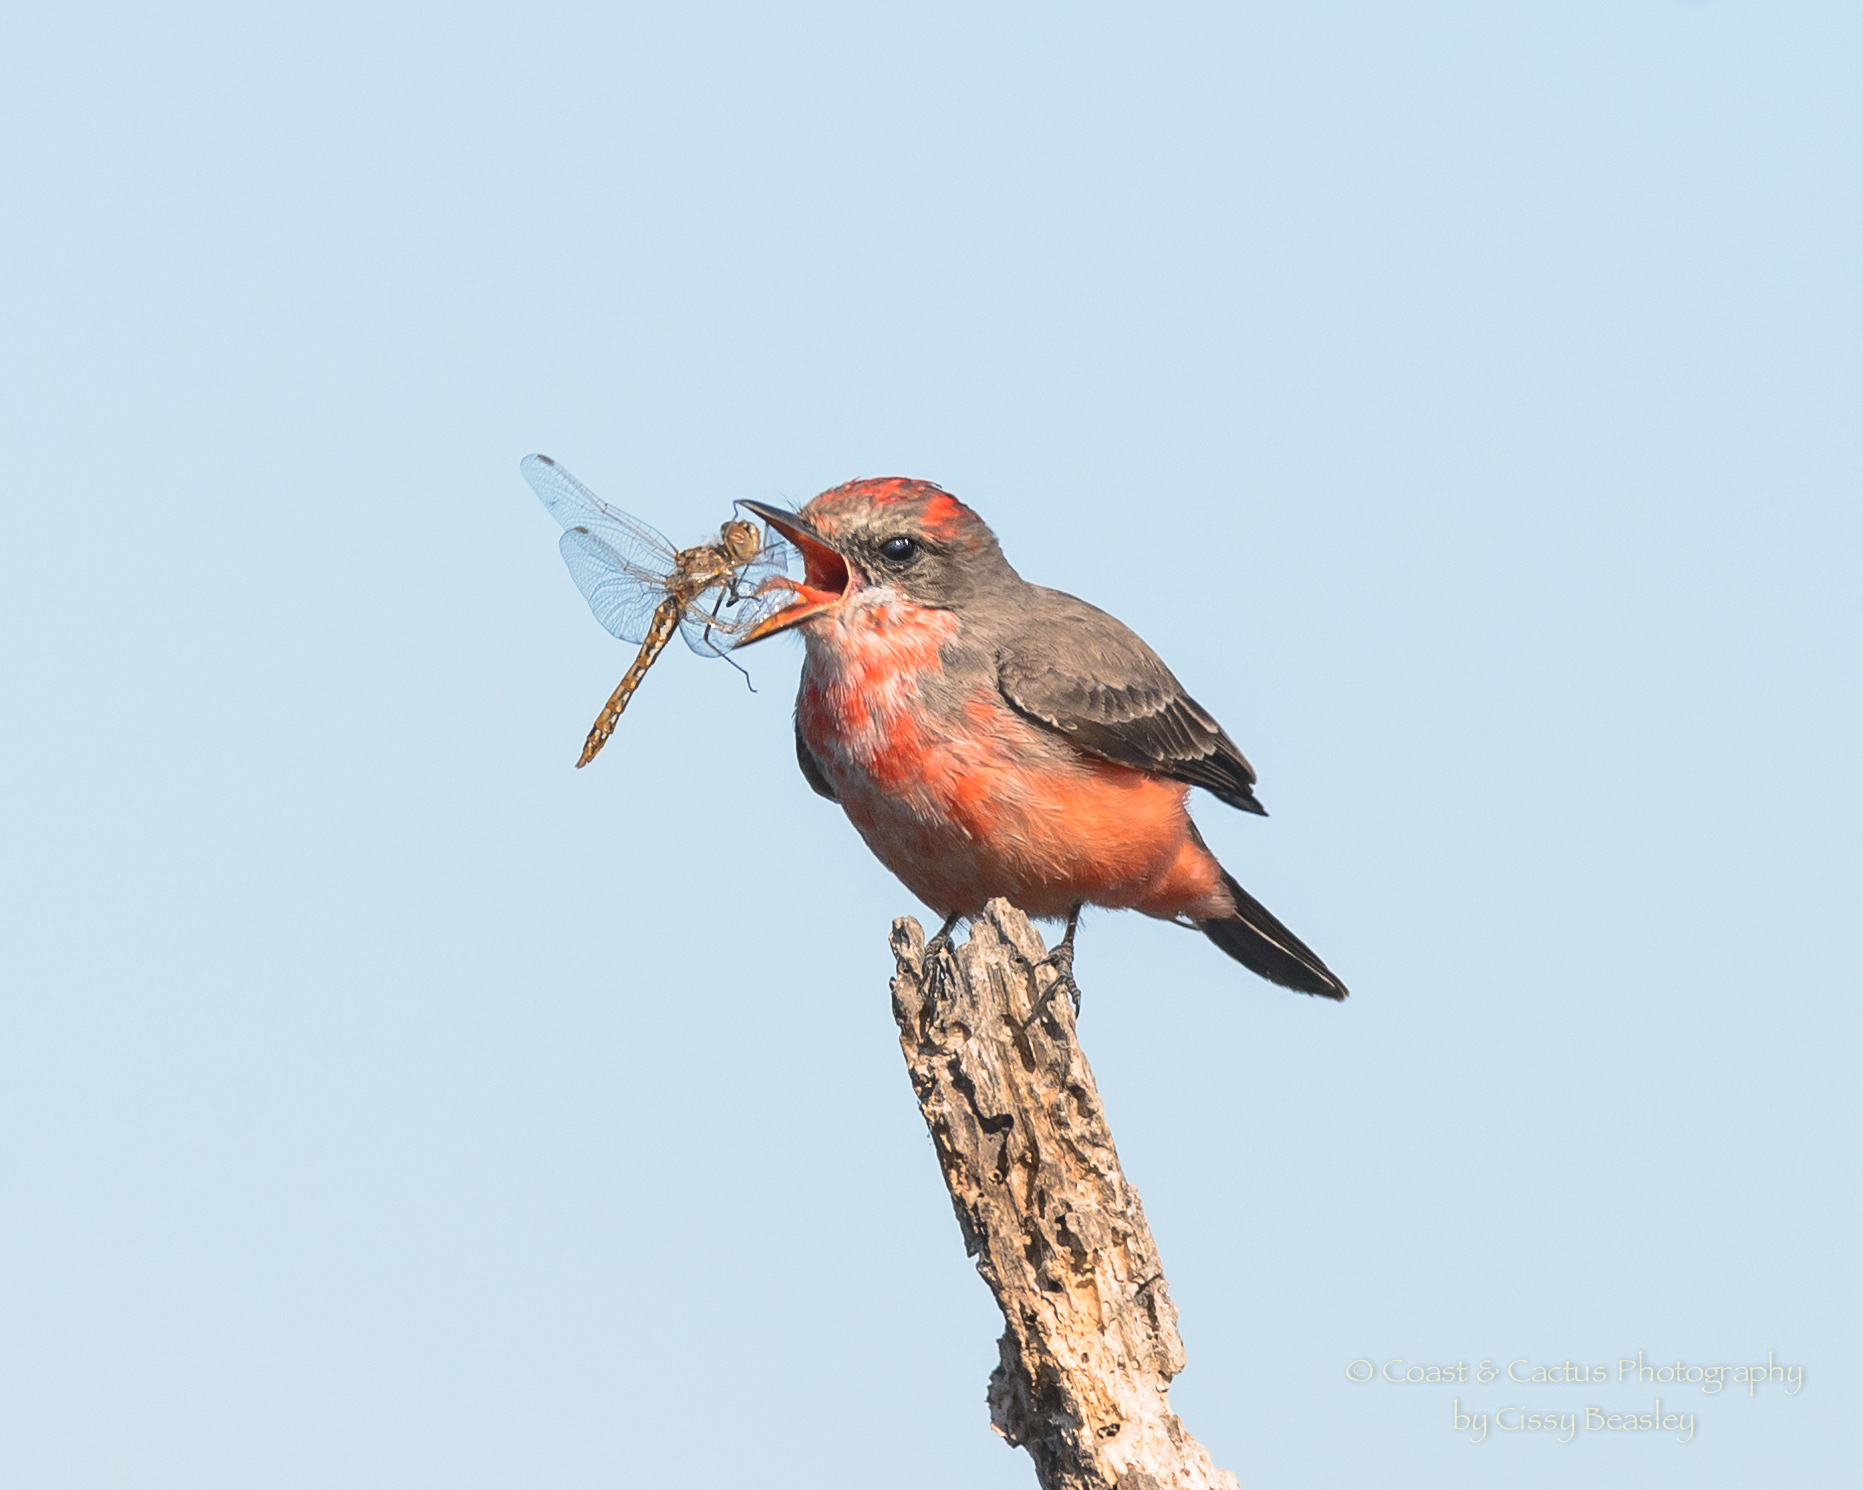 Cissy Beasley caught this Vermilion Flycatcher about to swallow a big dragonfly.